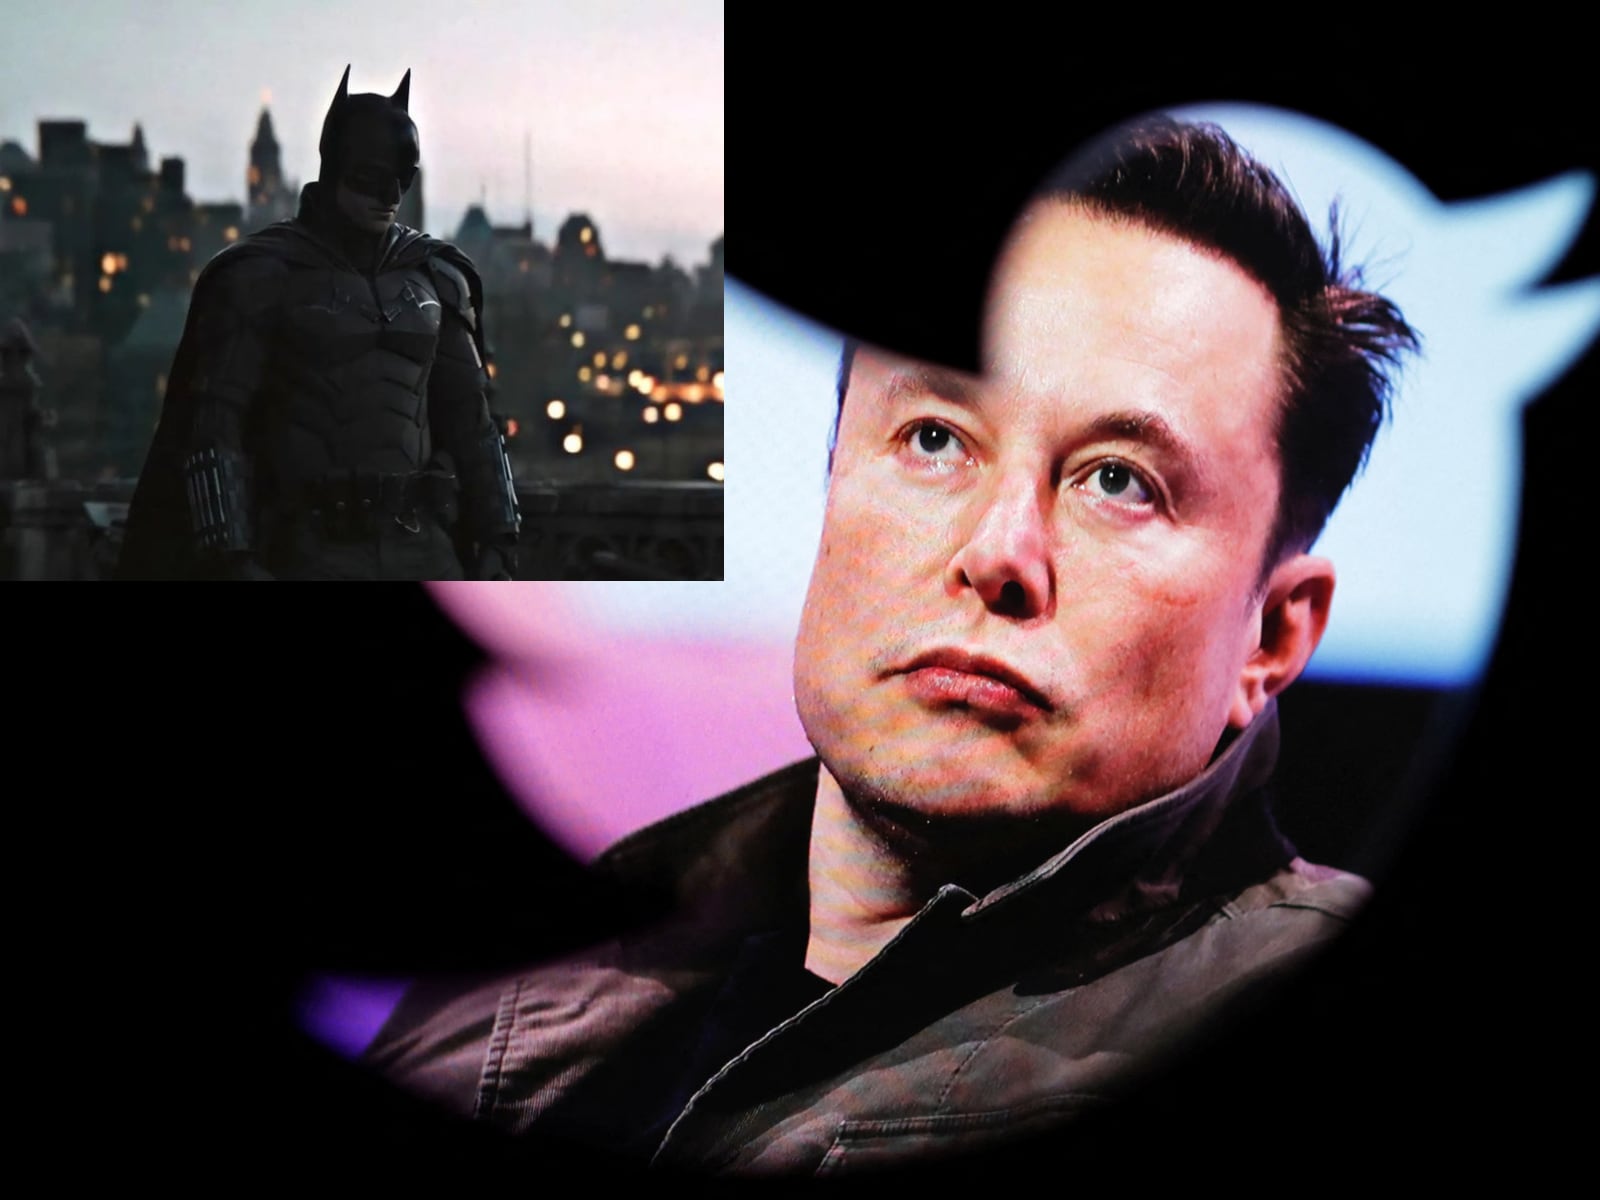 Did Elon Musk Just Compare Himself to Batman? Twitter Won't Stand For it